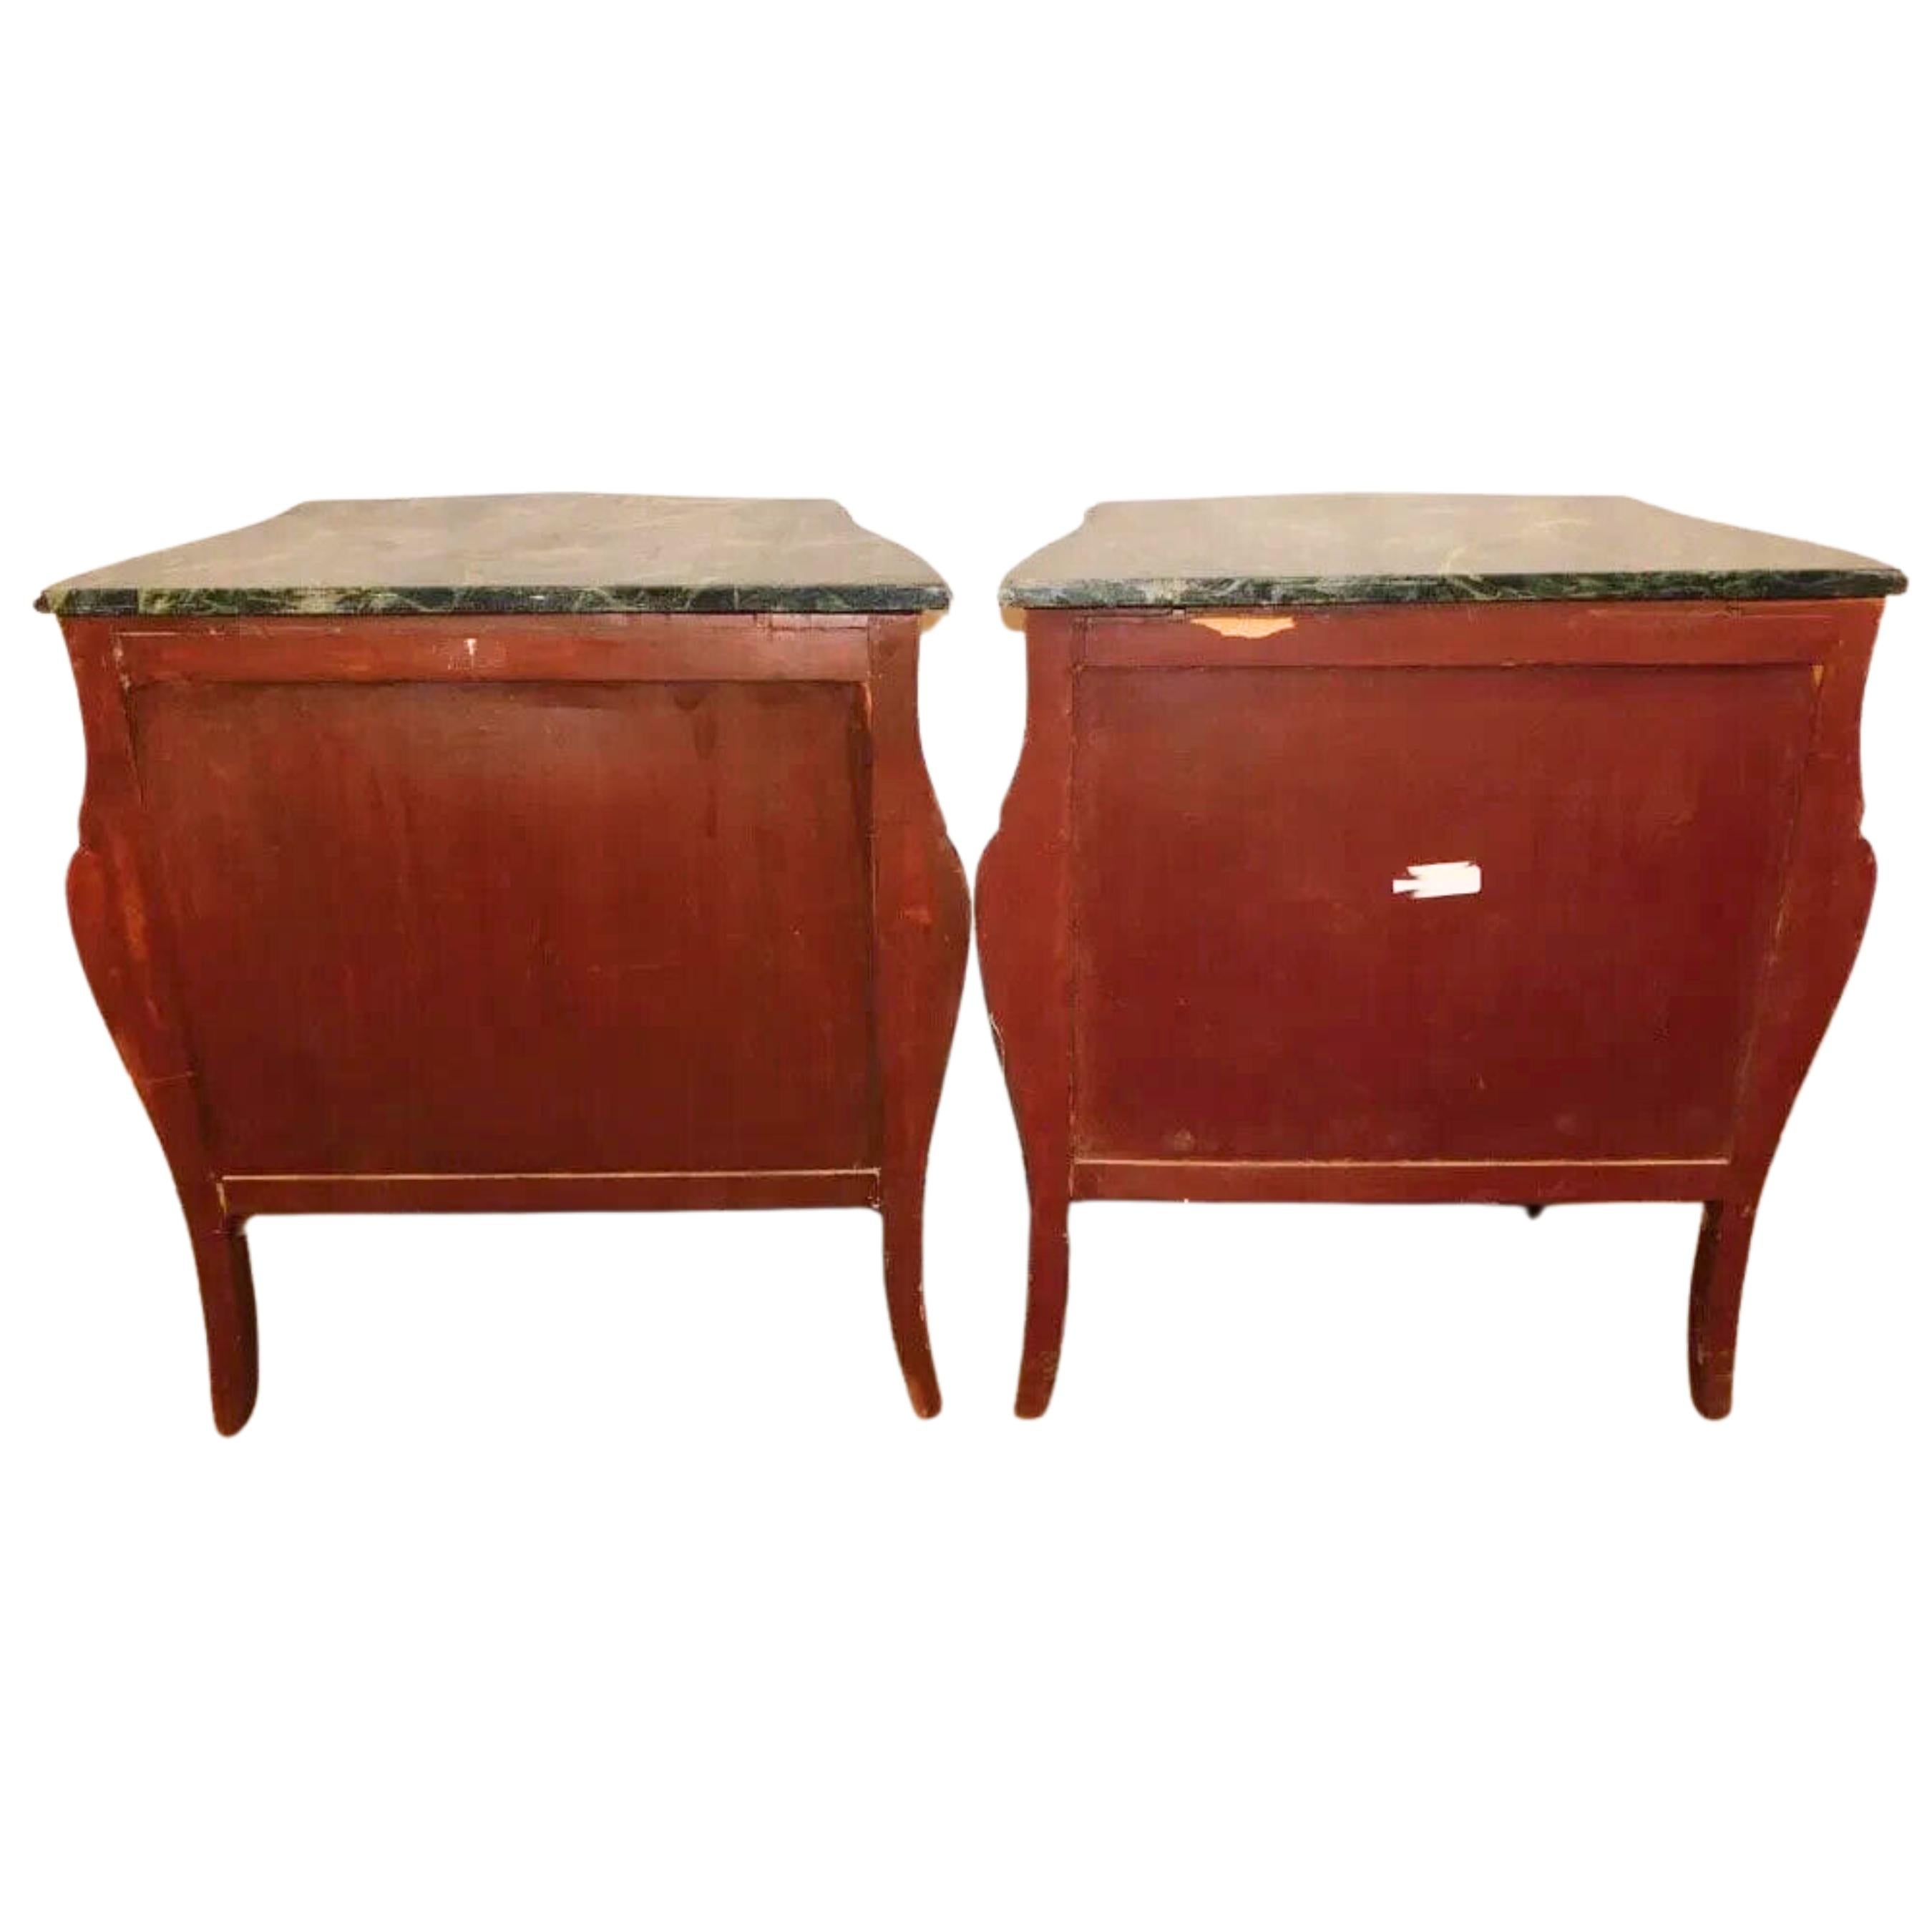 20th C. Walnut Inlay, Marble Top, Diminutive, With Bronze Commodes, Set of Two! For Sale 2